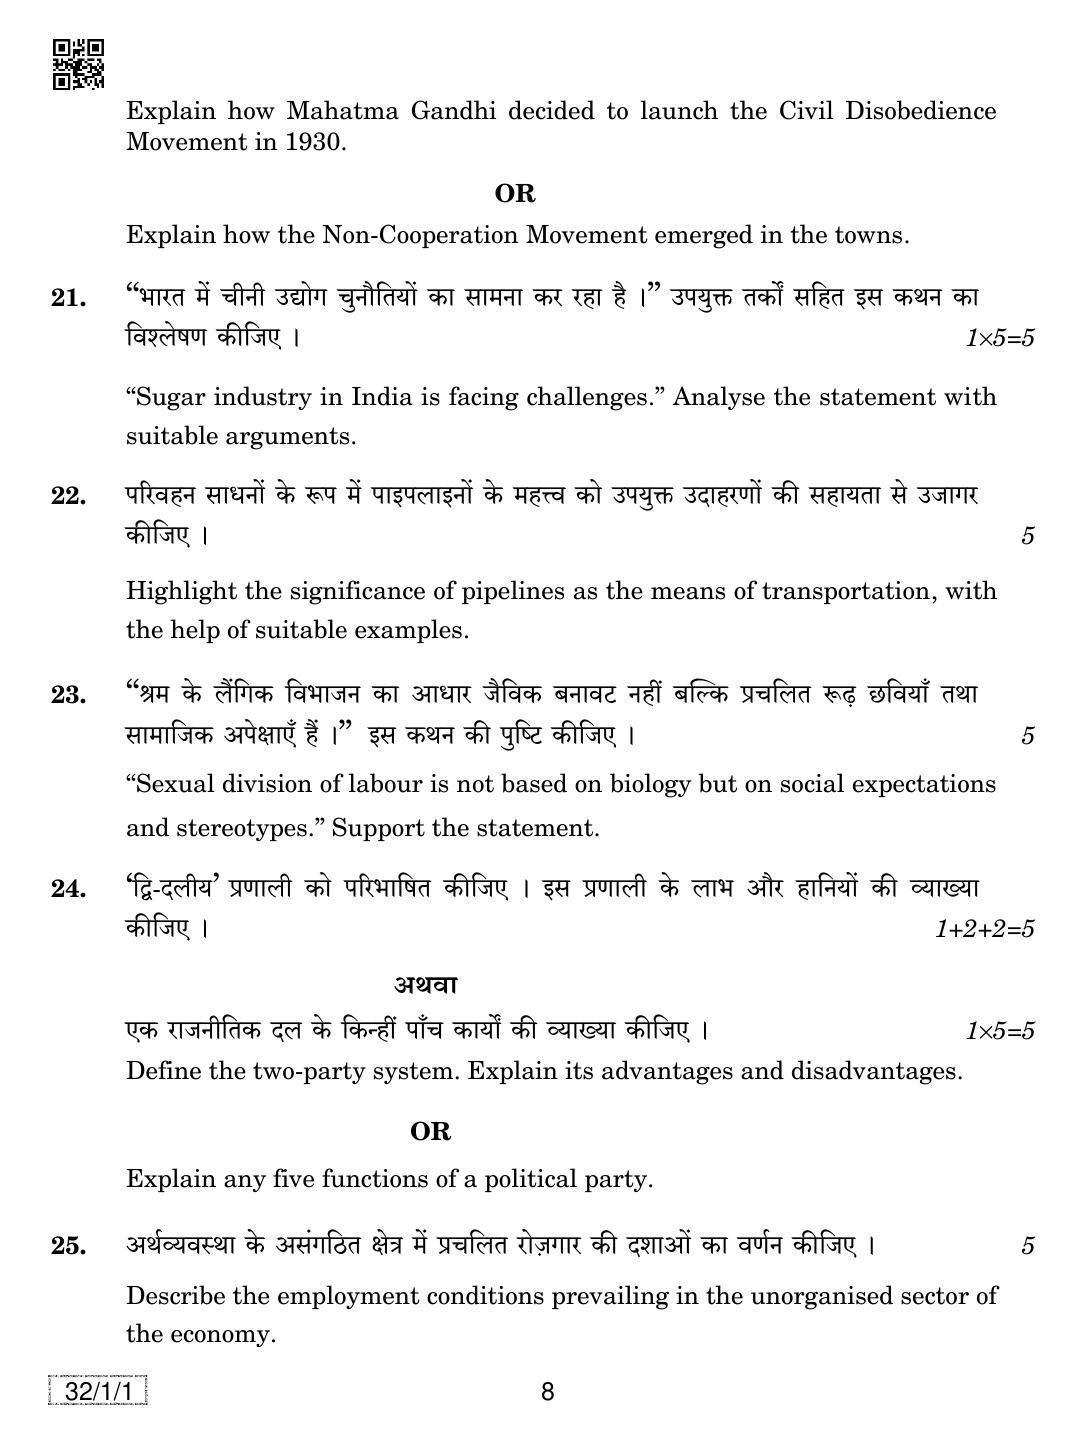 CBSE Class 10 32-1-1 SOCIAL SCIENCE 2019 Compartment Question Paper - Page 8